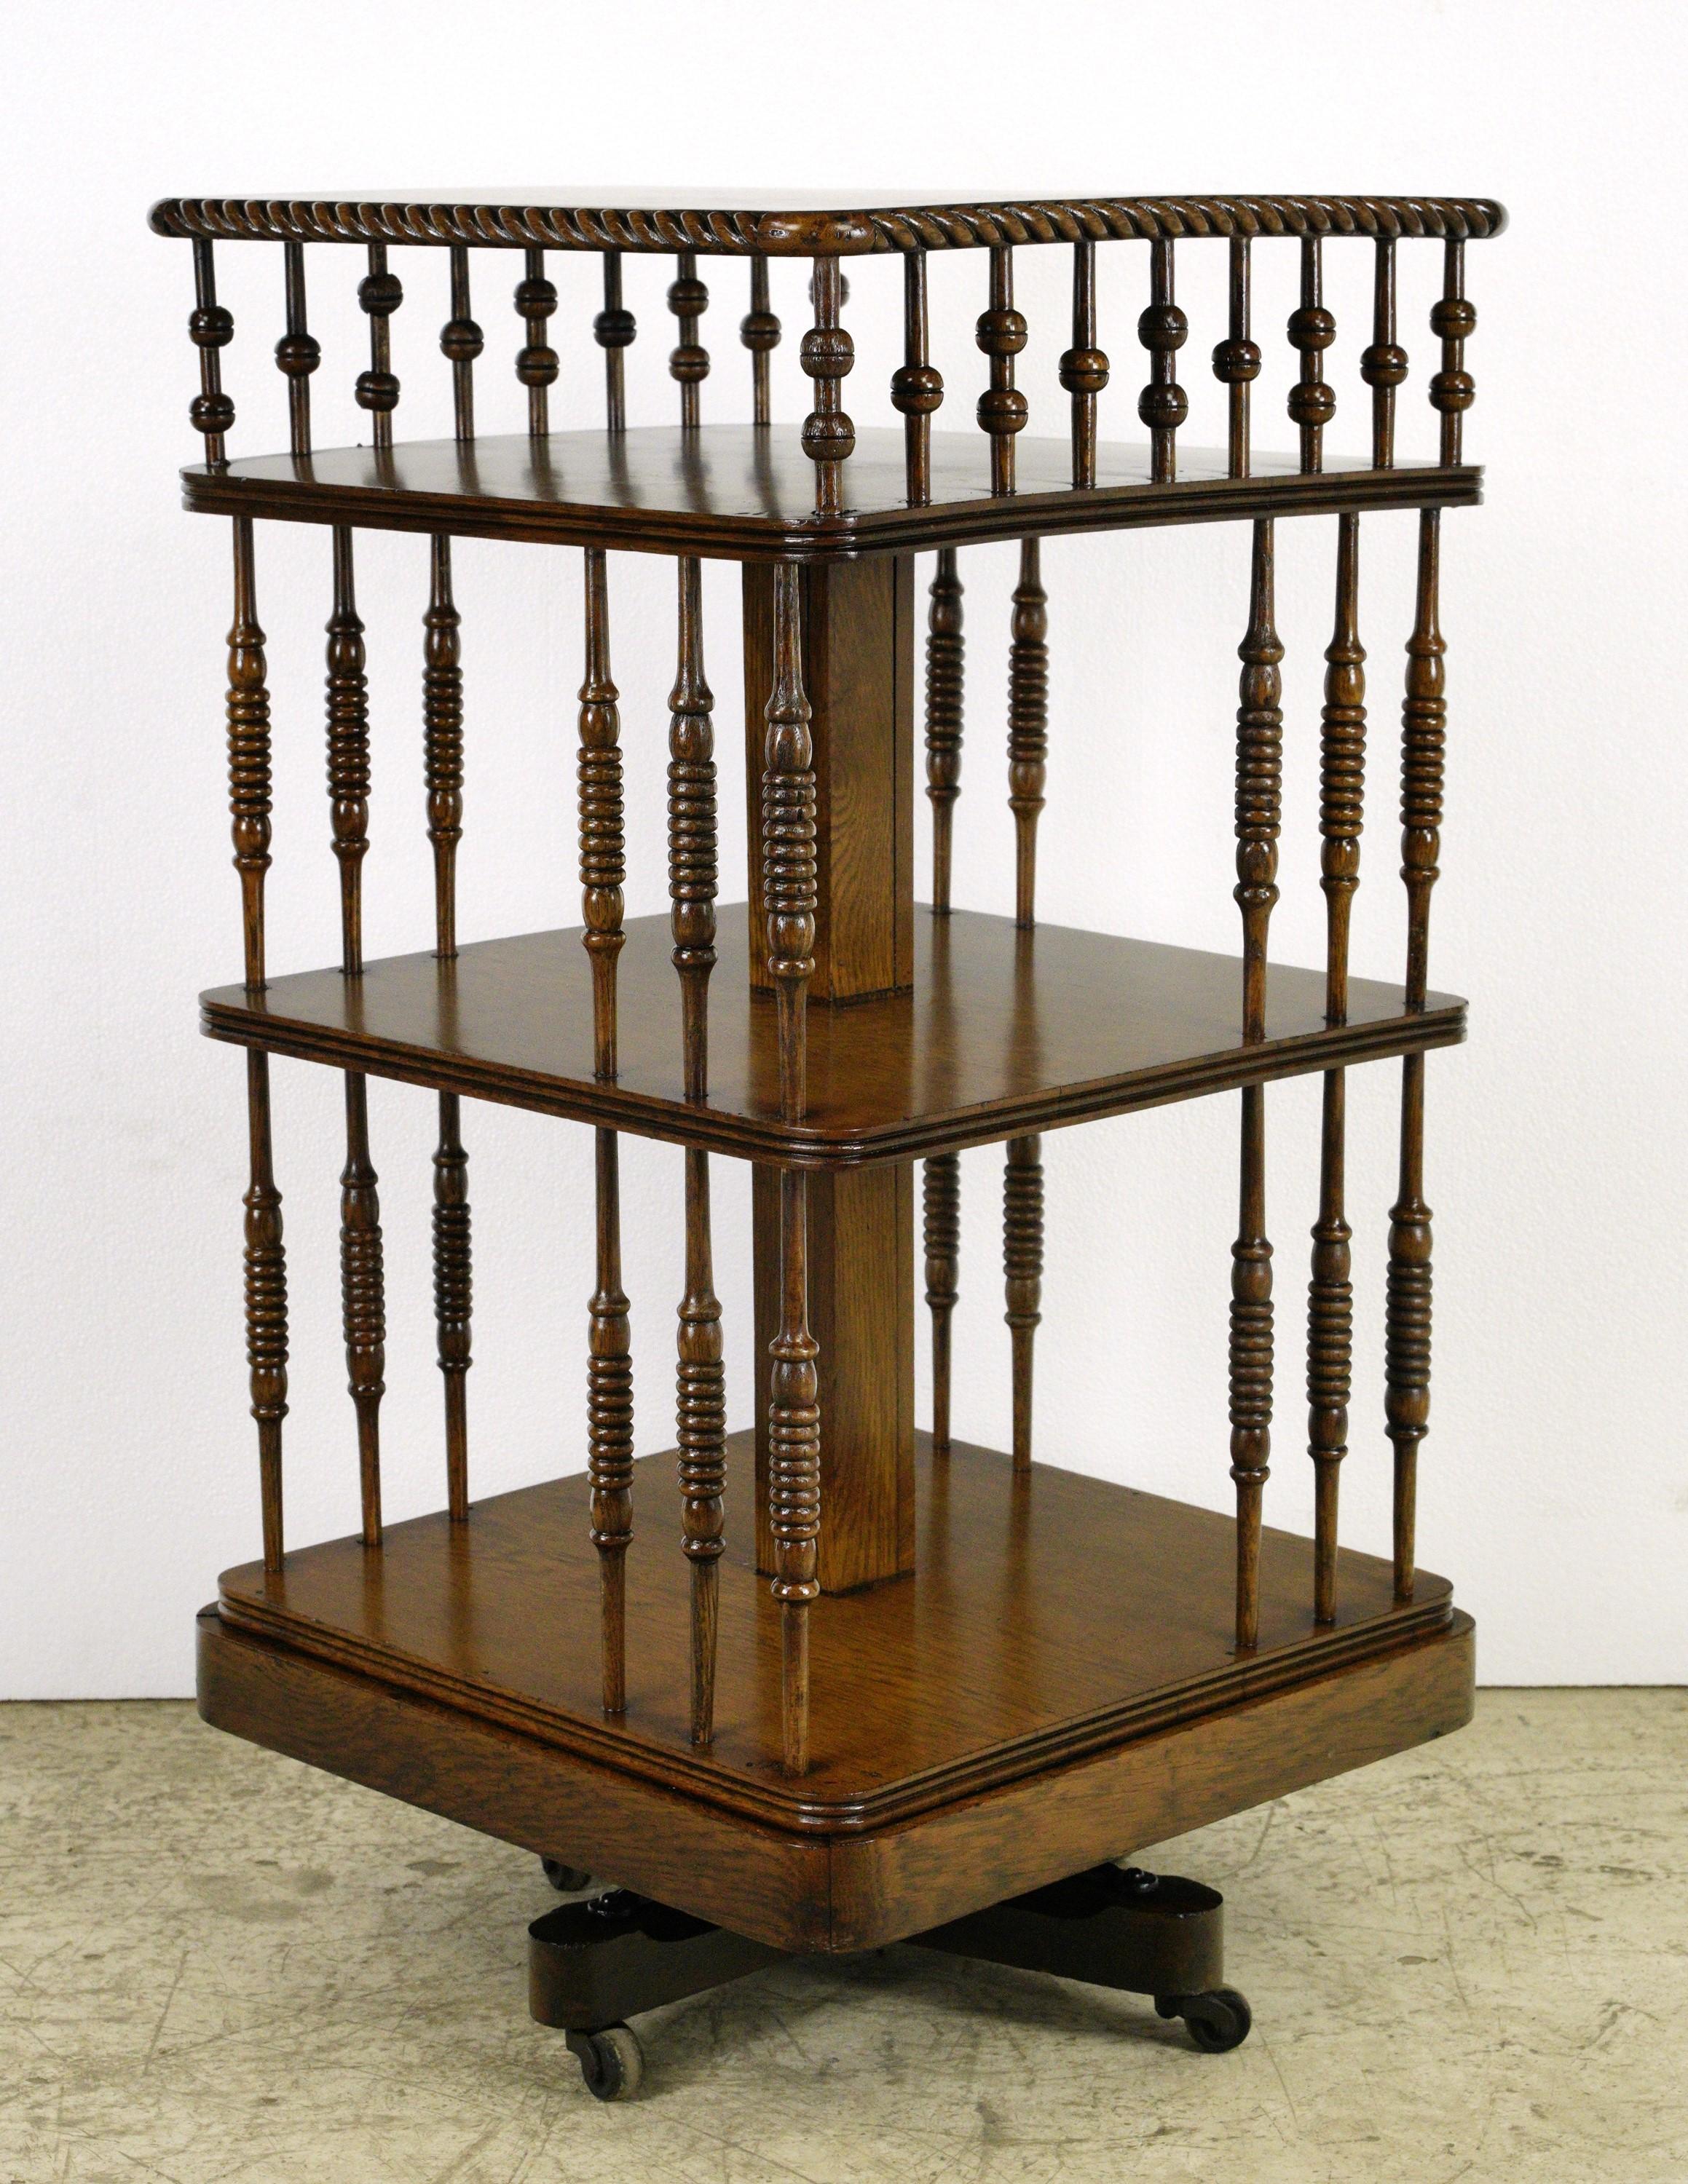 Antique free standing three tier revolving bookcase with spindle supports. This piece was restored in our shop. Good condition with appropriate wear from age, with some repairs made. Please note, this item is located in one of our NYC locations.